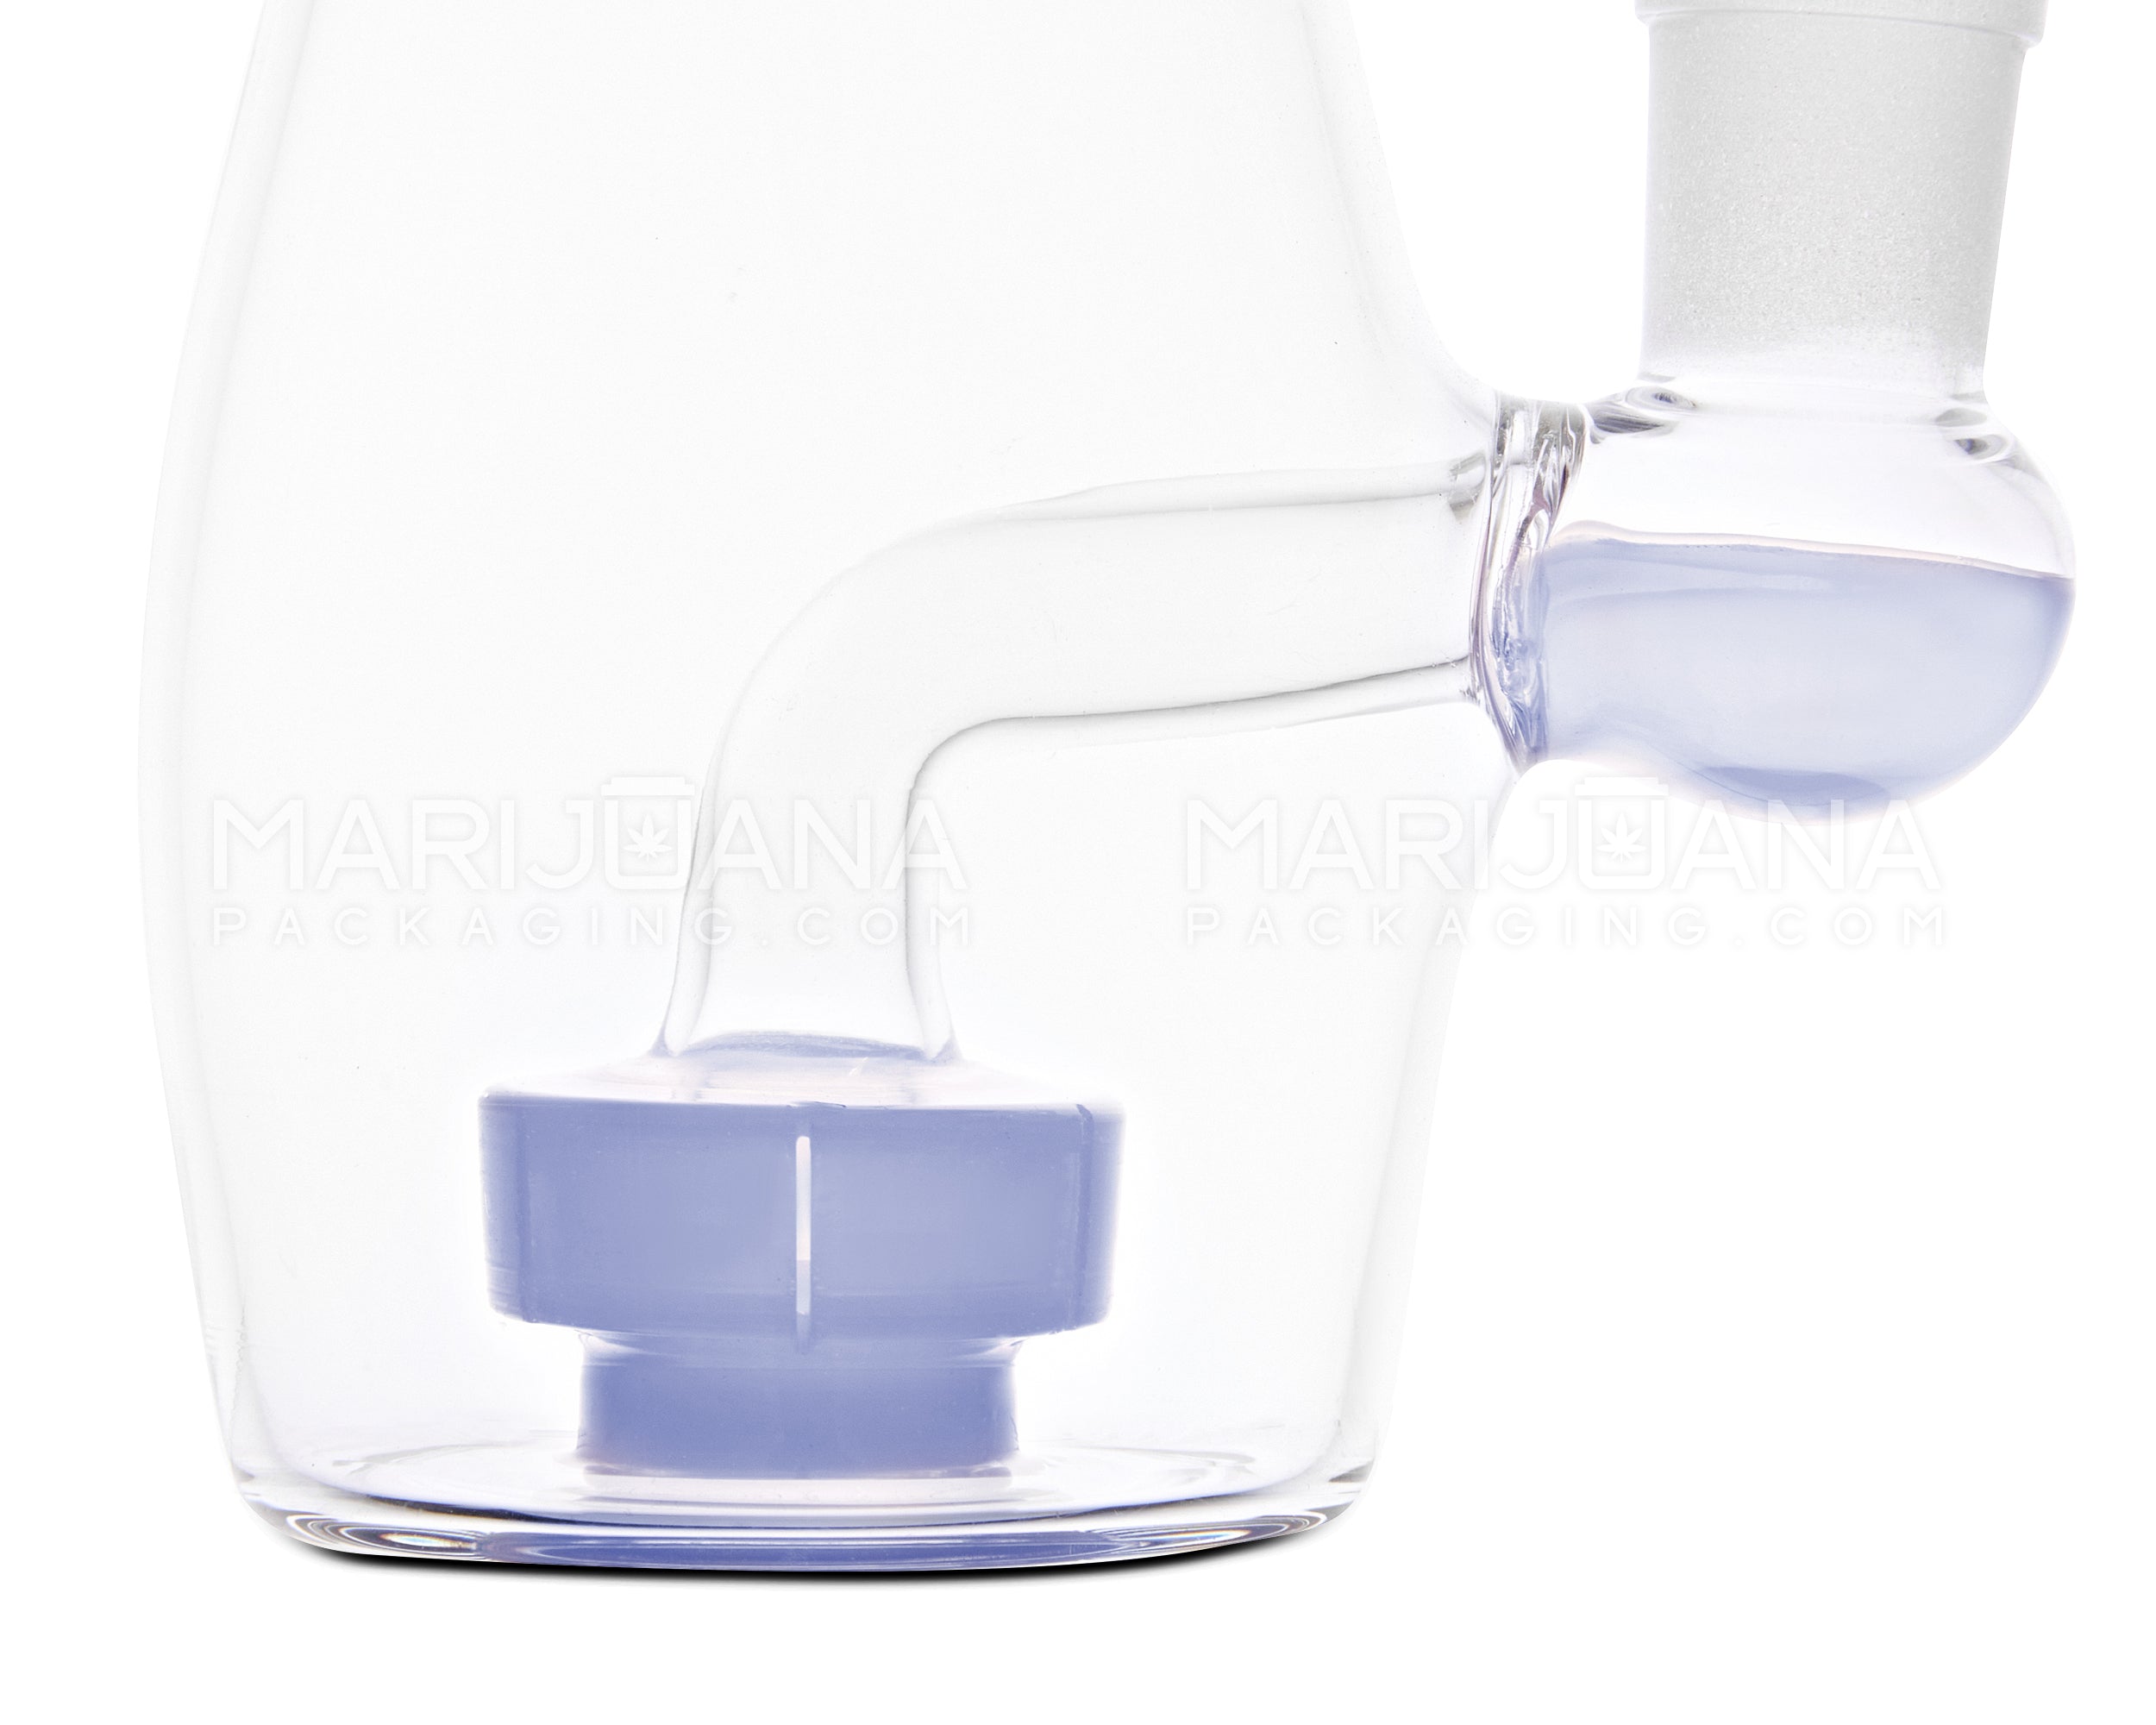 USA Glass | Straight Neck Baby Bottle Water Pipe w/ Showerhead Percolator | 6in Tall - 14mm Bowl - Blue